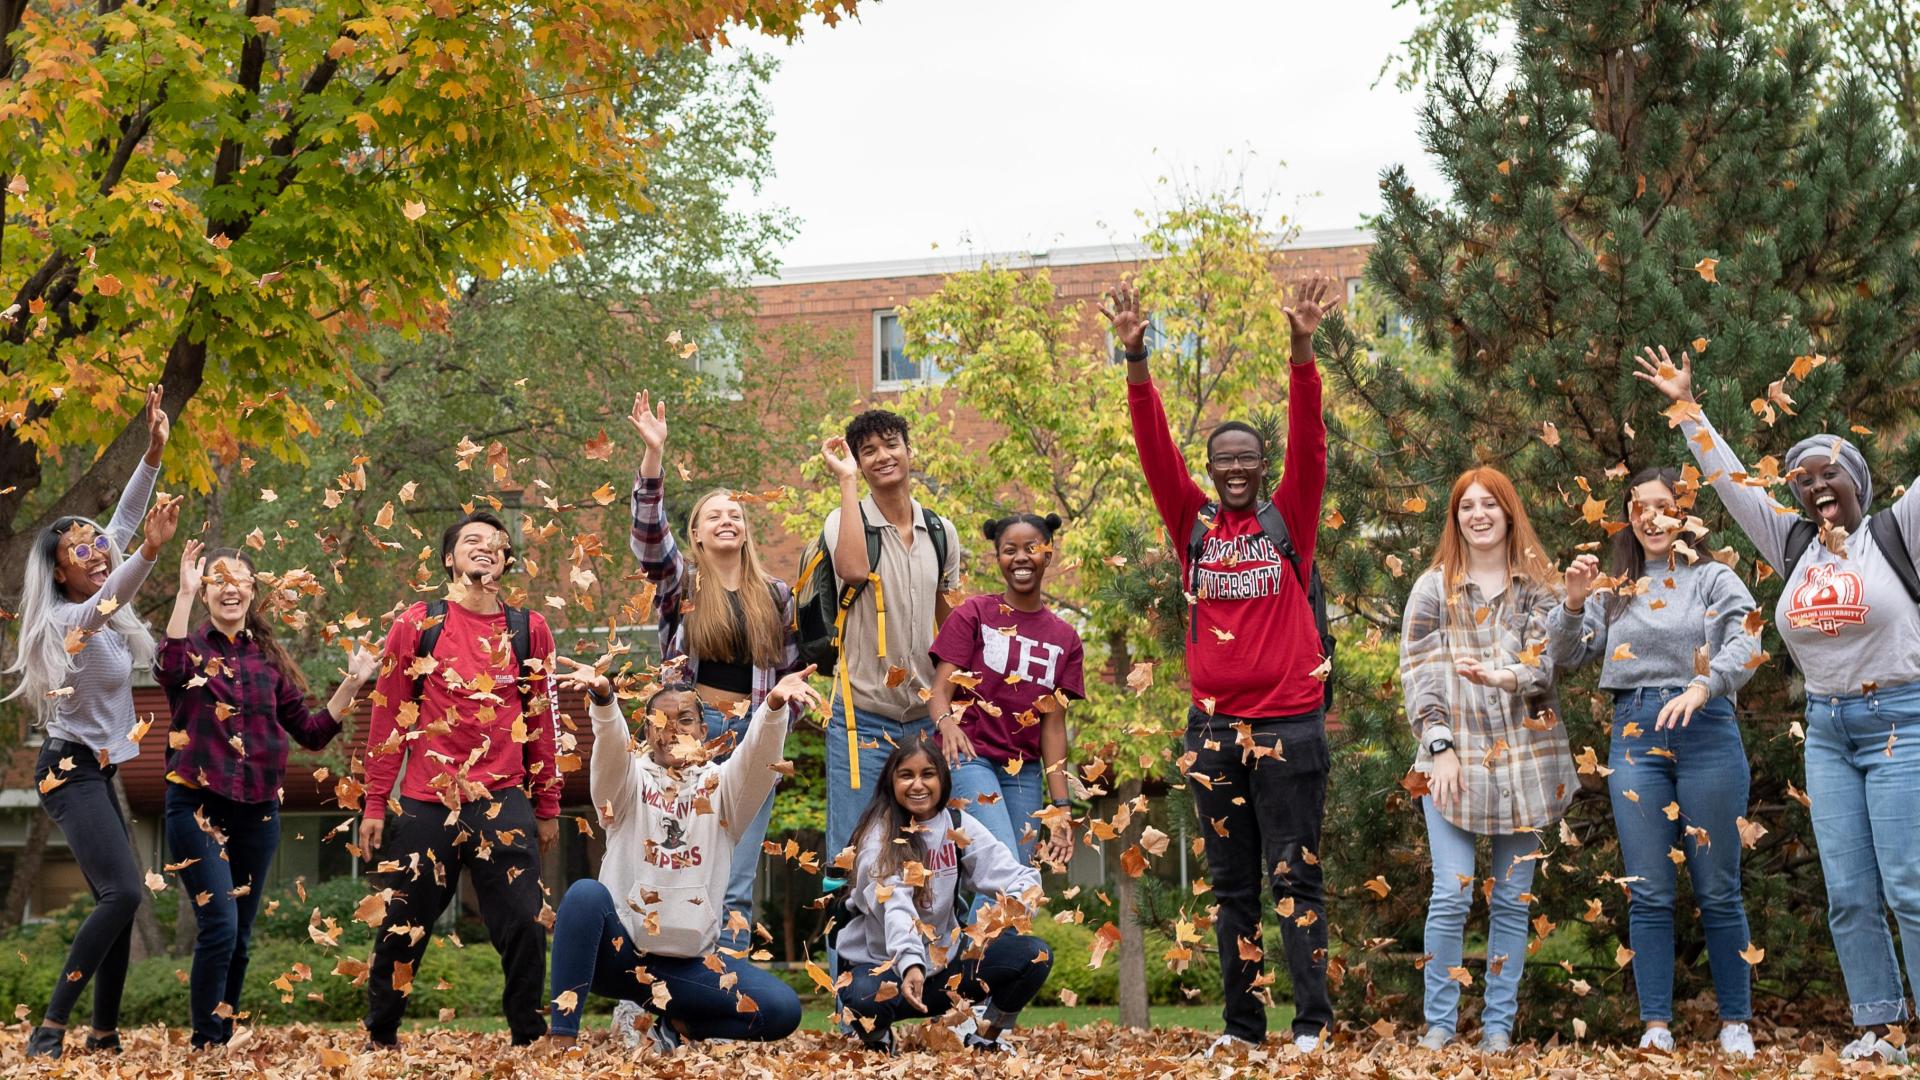  51 happy students at 51 during the fall blowing the leafs